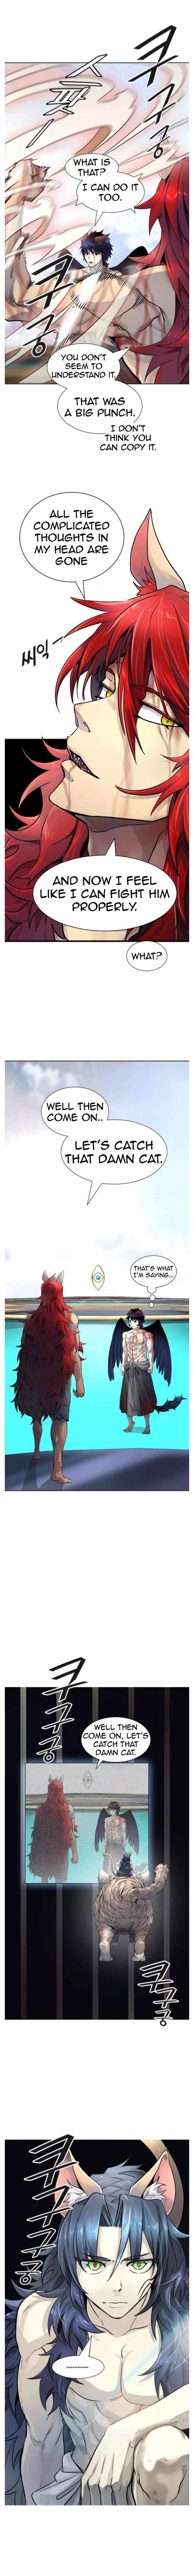 Tower of God Chapter 503 - Page 24